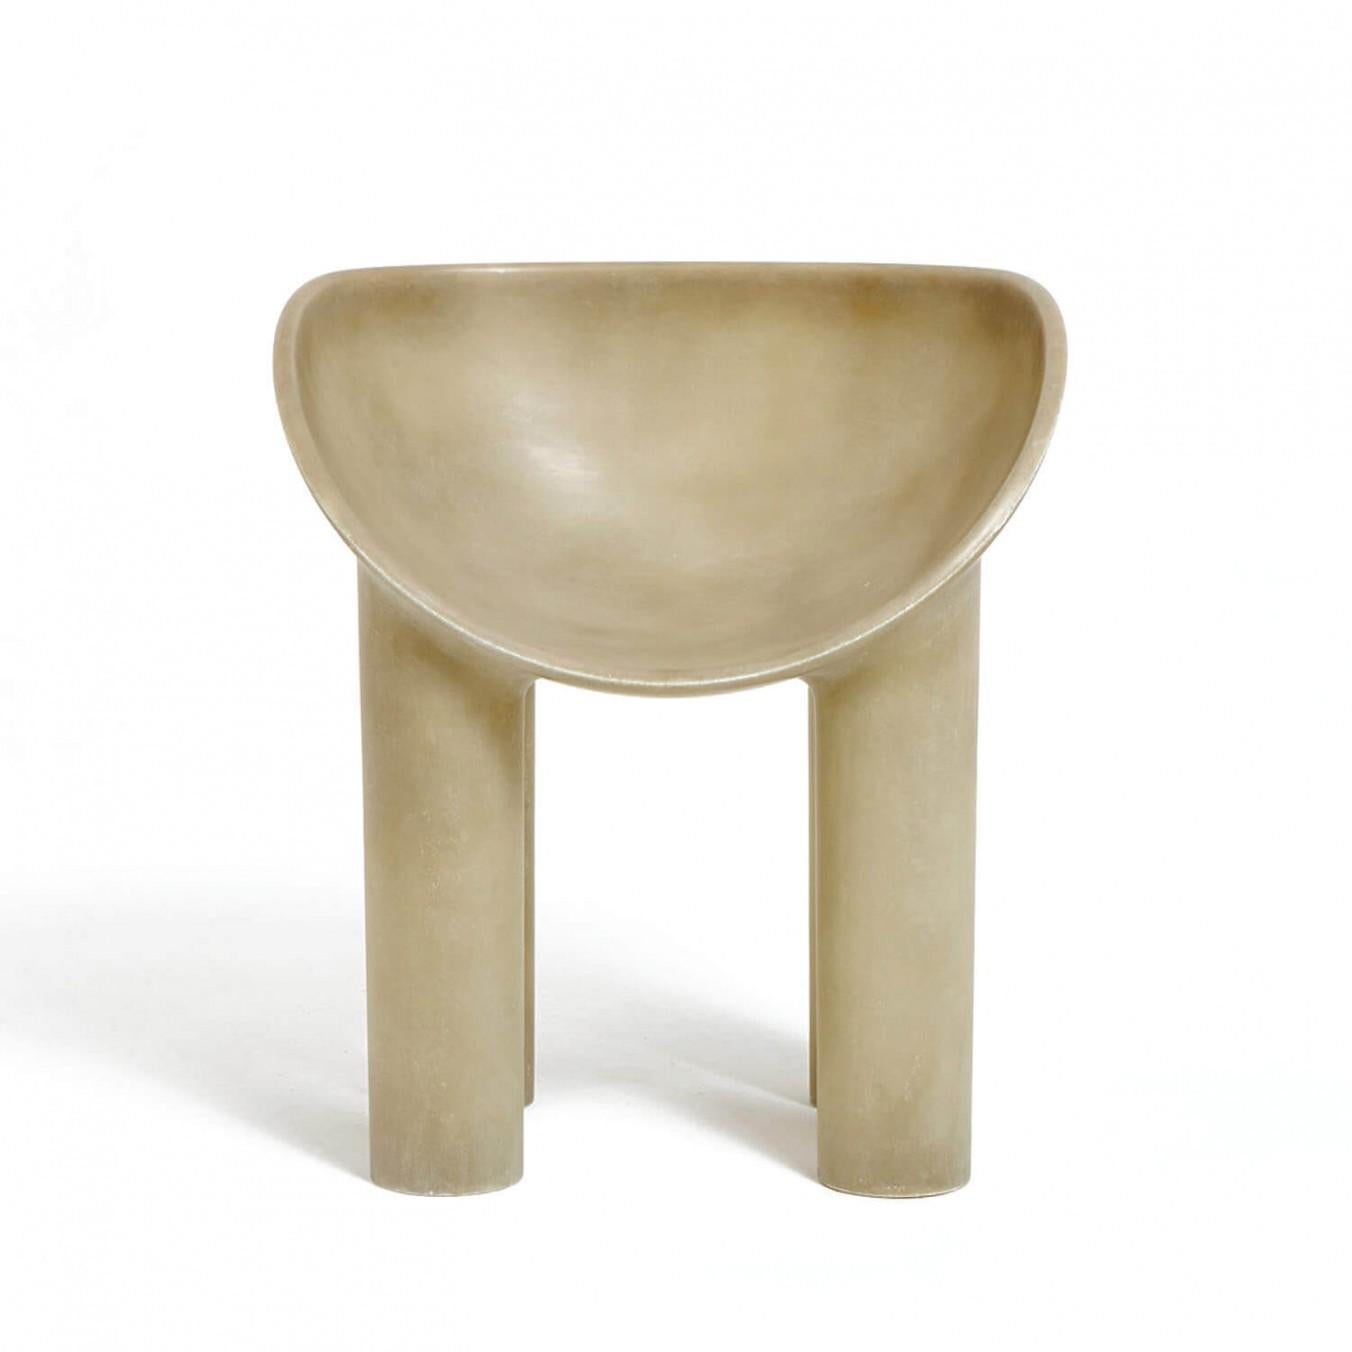 Contemporary fiberglass chair - Roly Poly Dining Chair by Faye Toogood. This is shown in the raw fiberglass finish. 
Design: Faye Toogood
Material: Fiberglass 
Available also in cream or charcoal finish, please contact us.

The Roly Poly chair